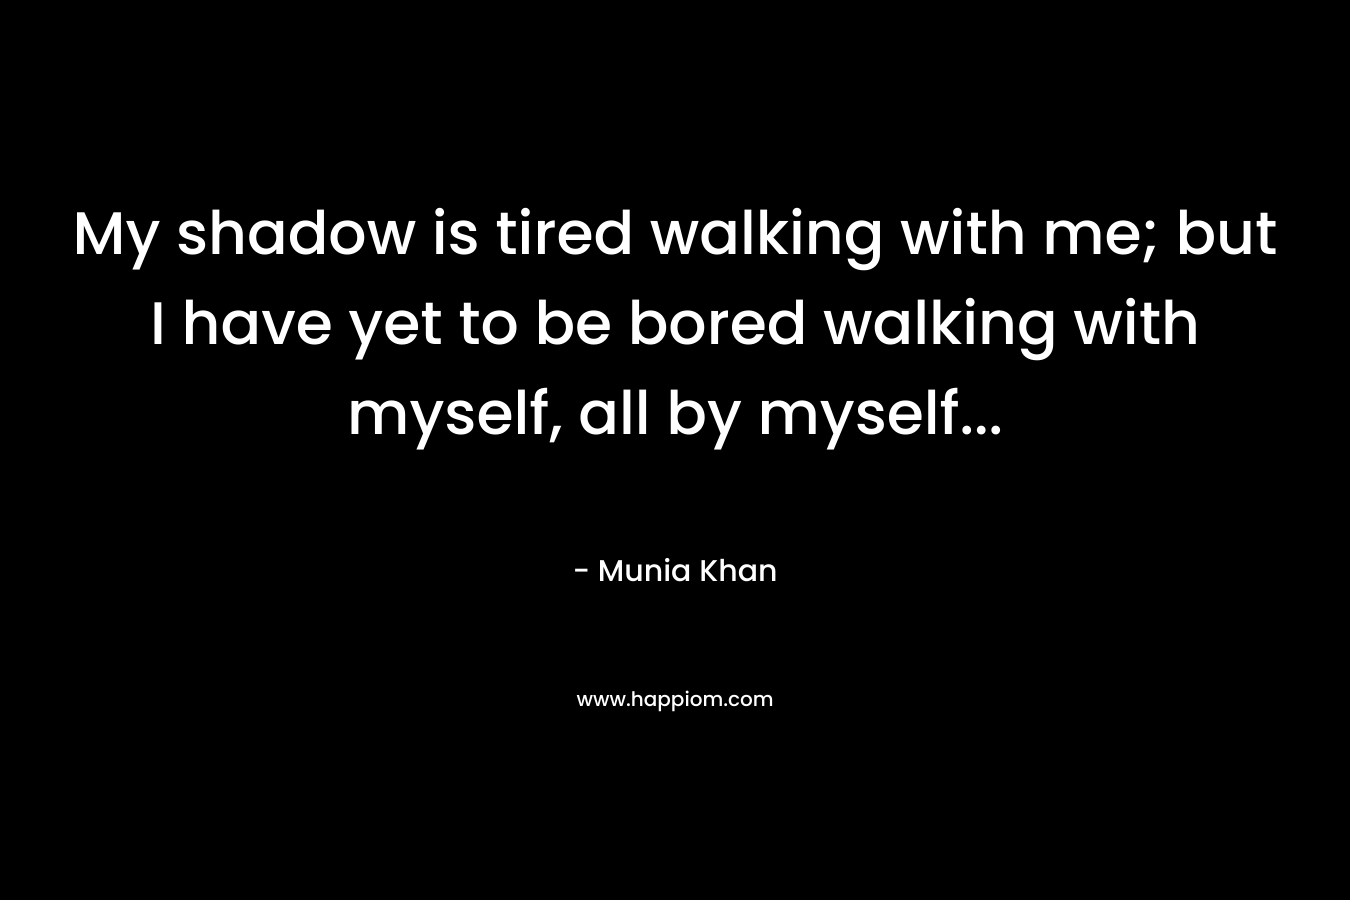 My shadow is tired walking with me; but I have yet to be bored walking with myself, all by myself...